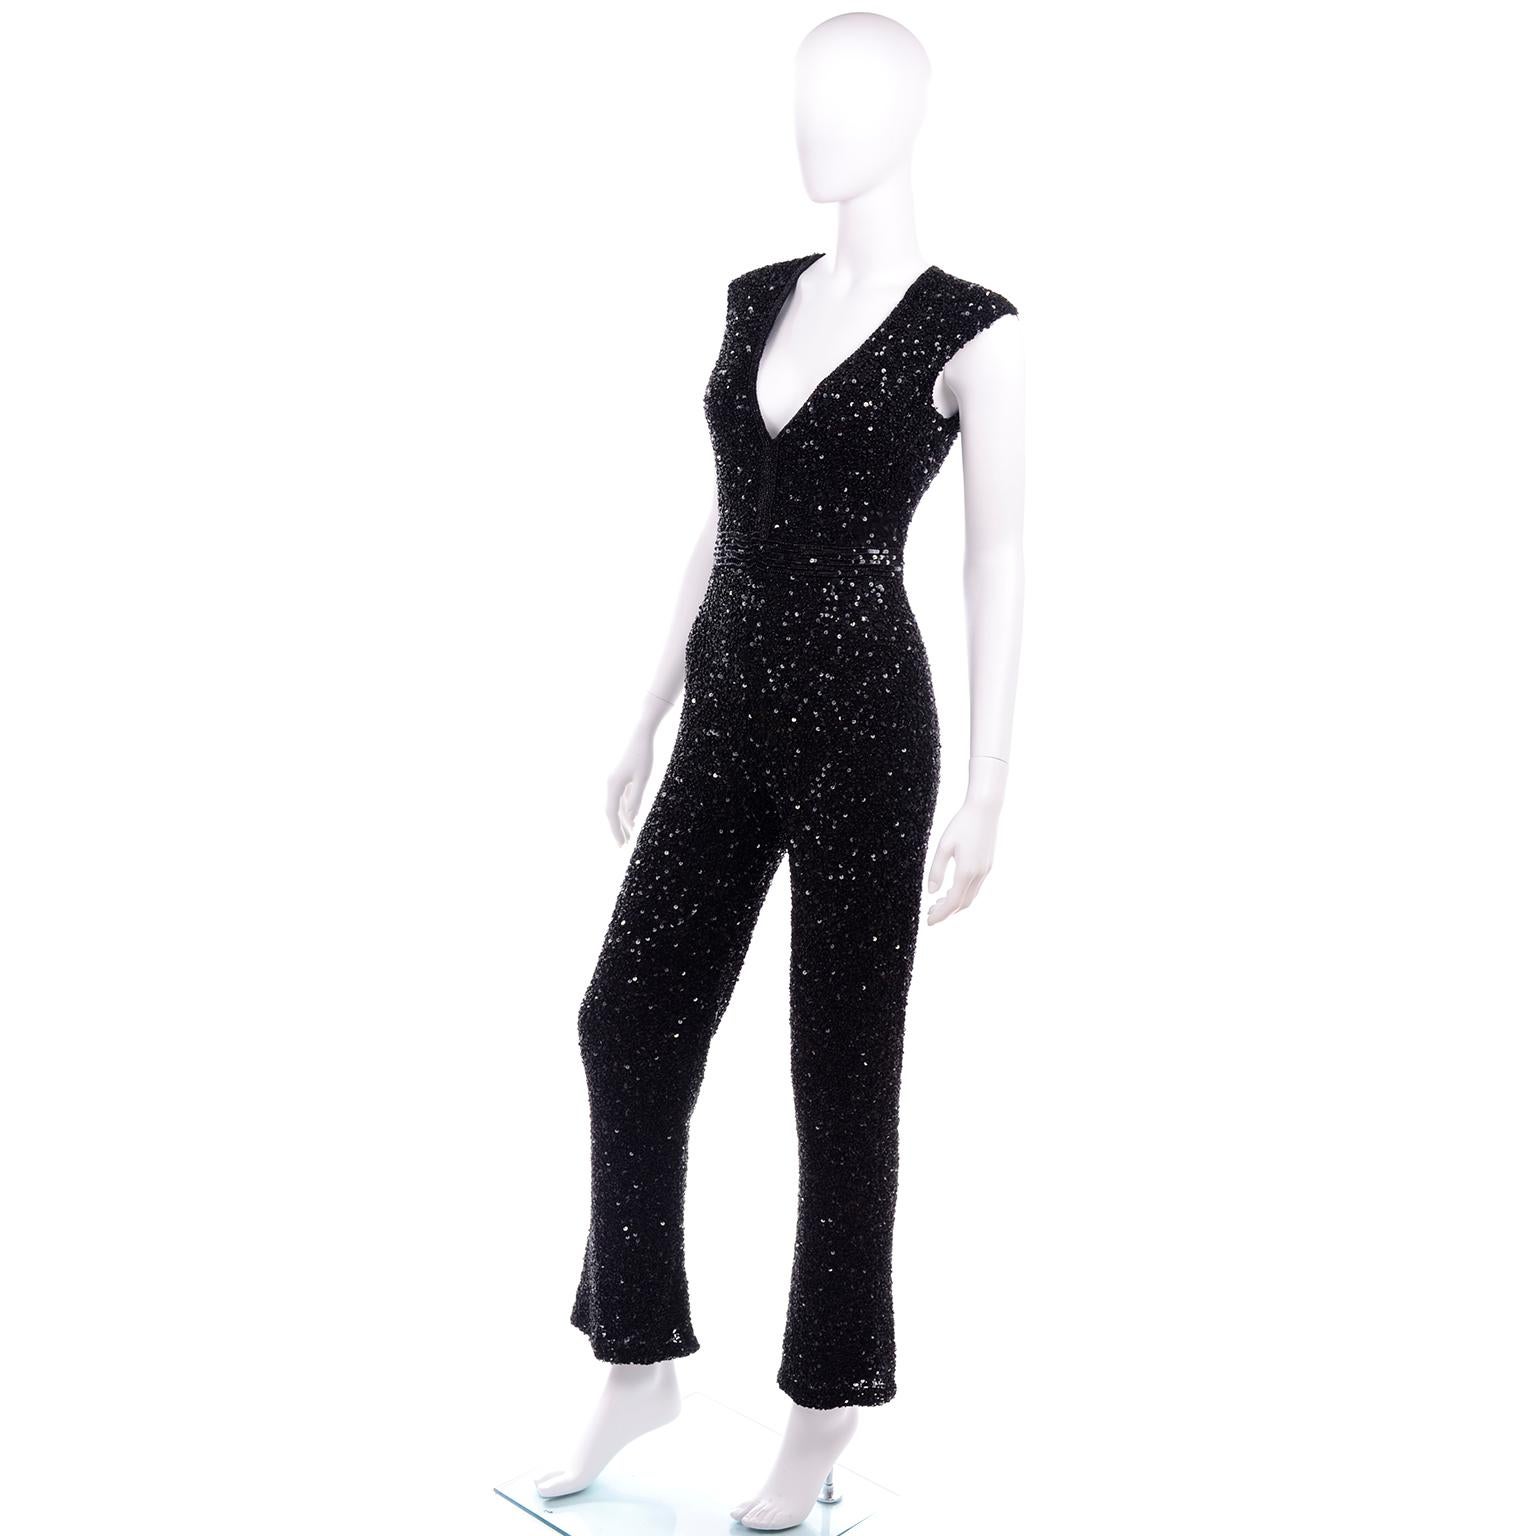 Heavily Beaded Vintage Black Jumpsuit Evening Dress Alternative In Excellent Condition For Sale In Portland, OR